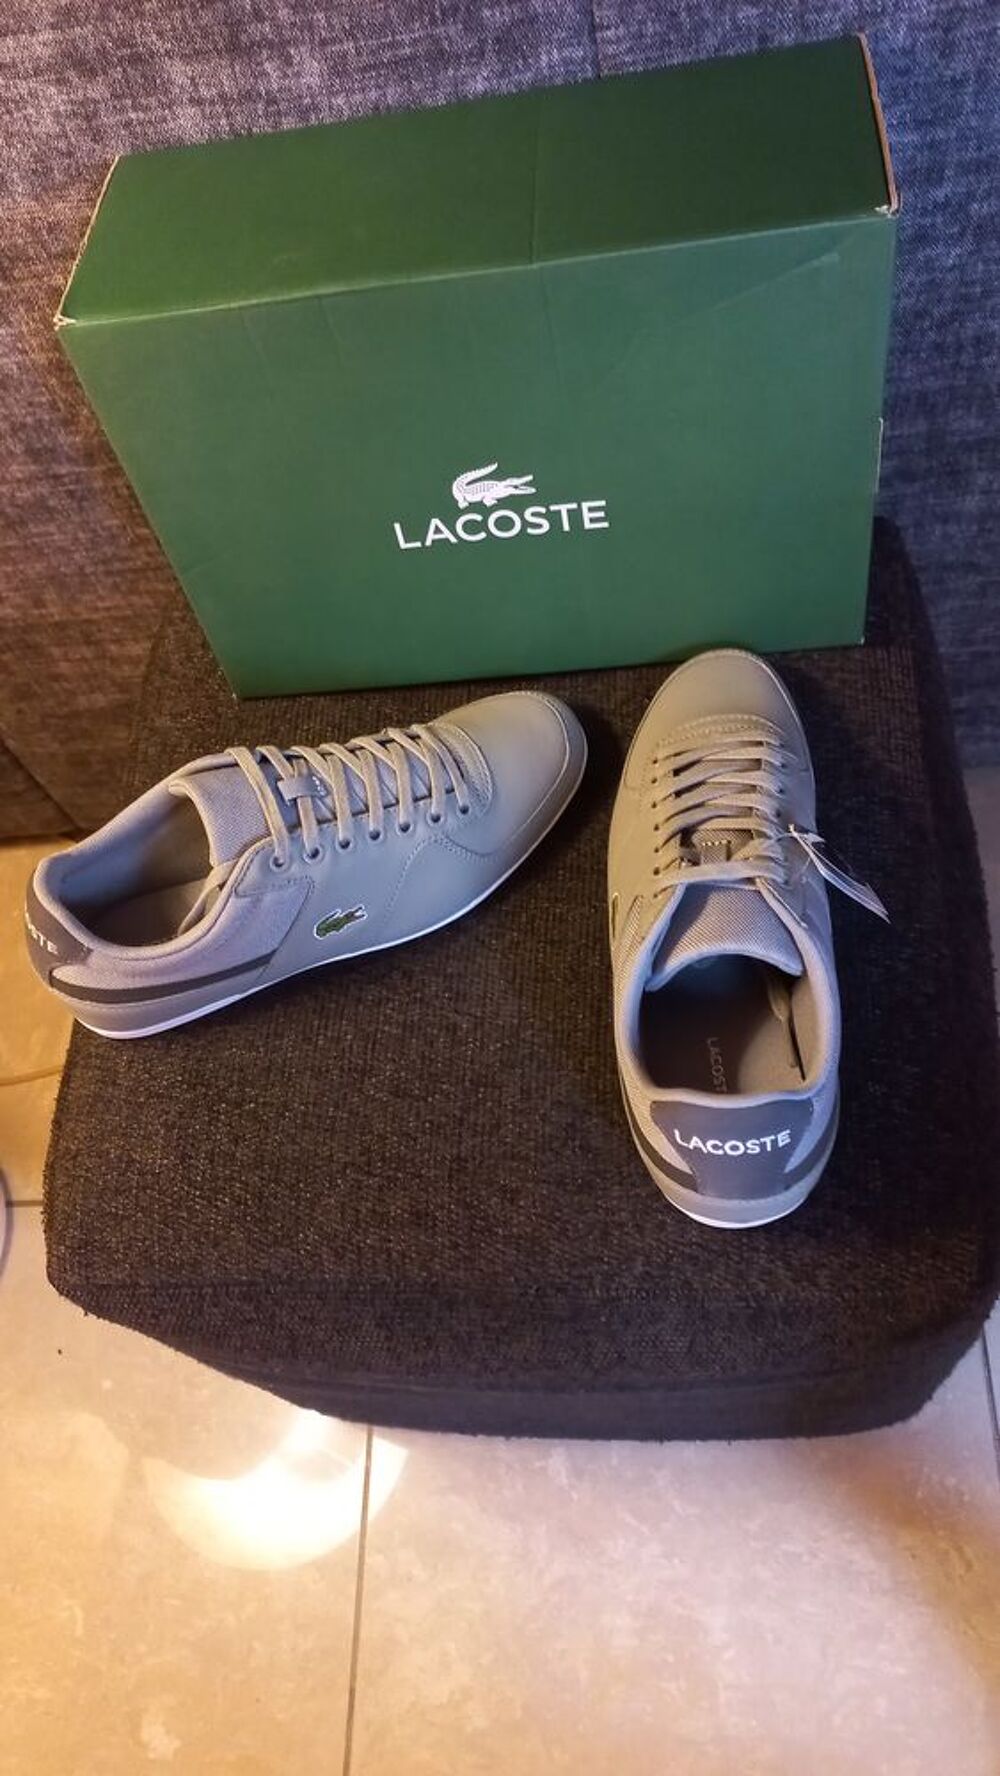 TENNIS MARQUE LACOSTE POINTURE 40 Chaussures